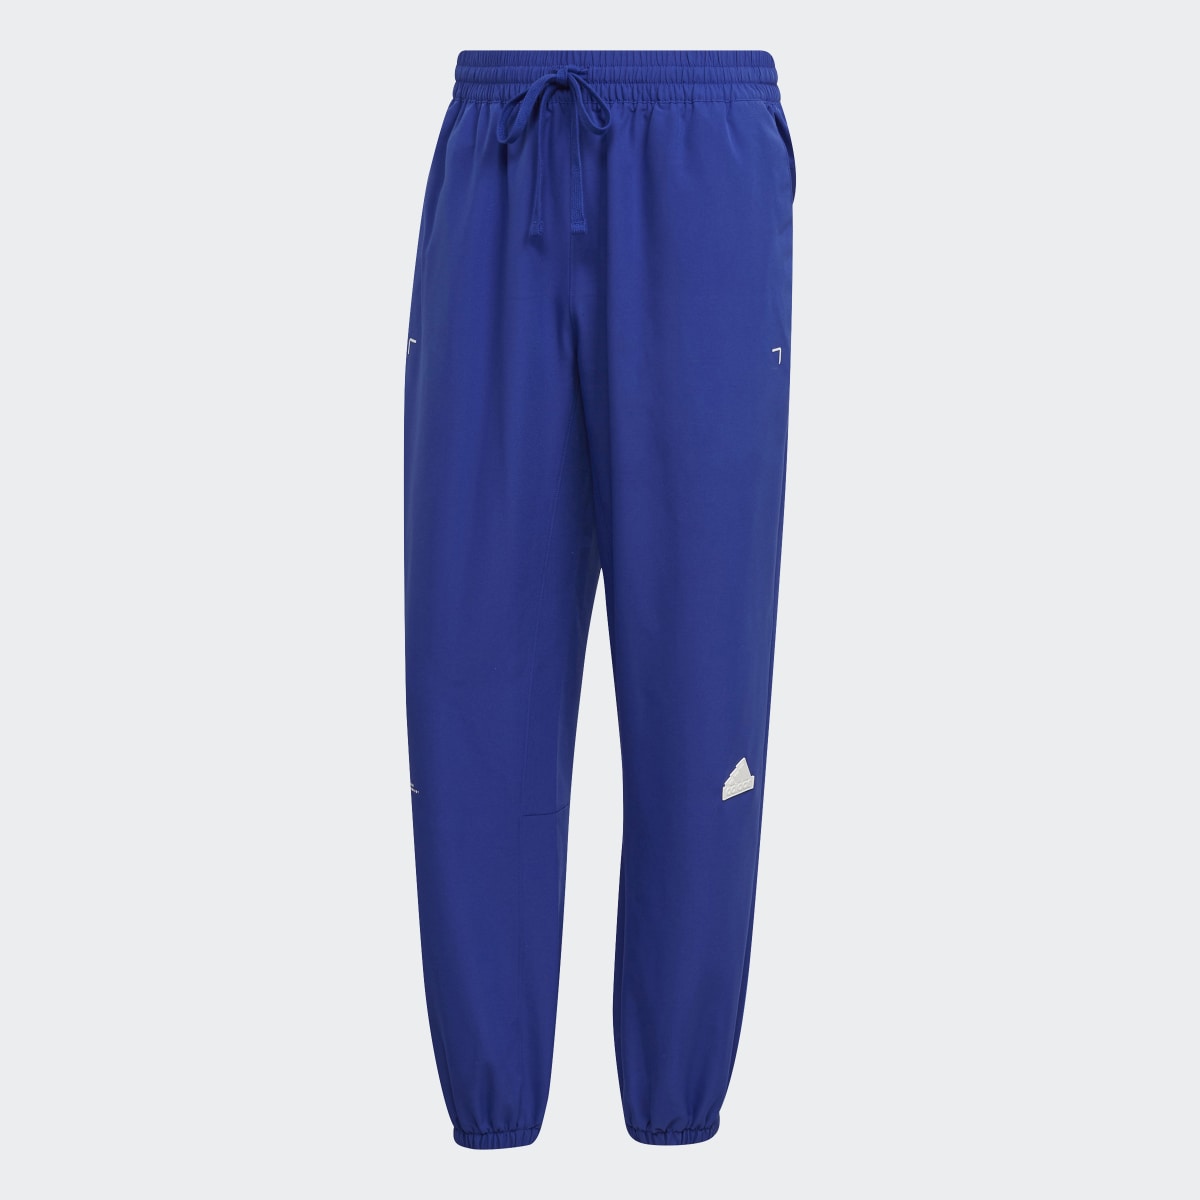 Adidas Woven Tracksuit Bottoms. 5